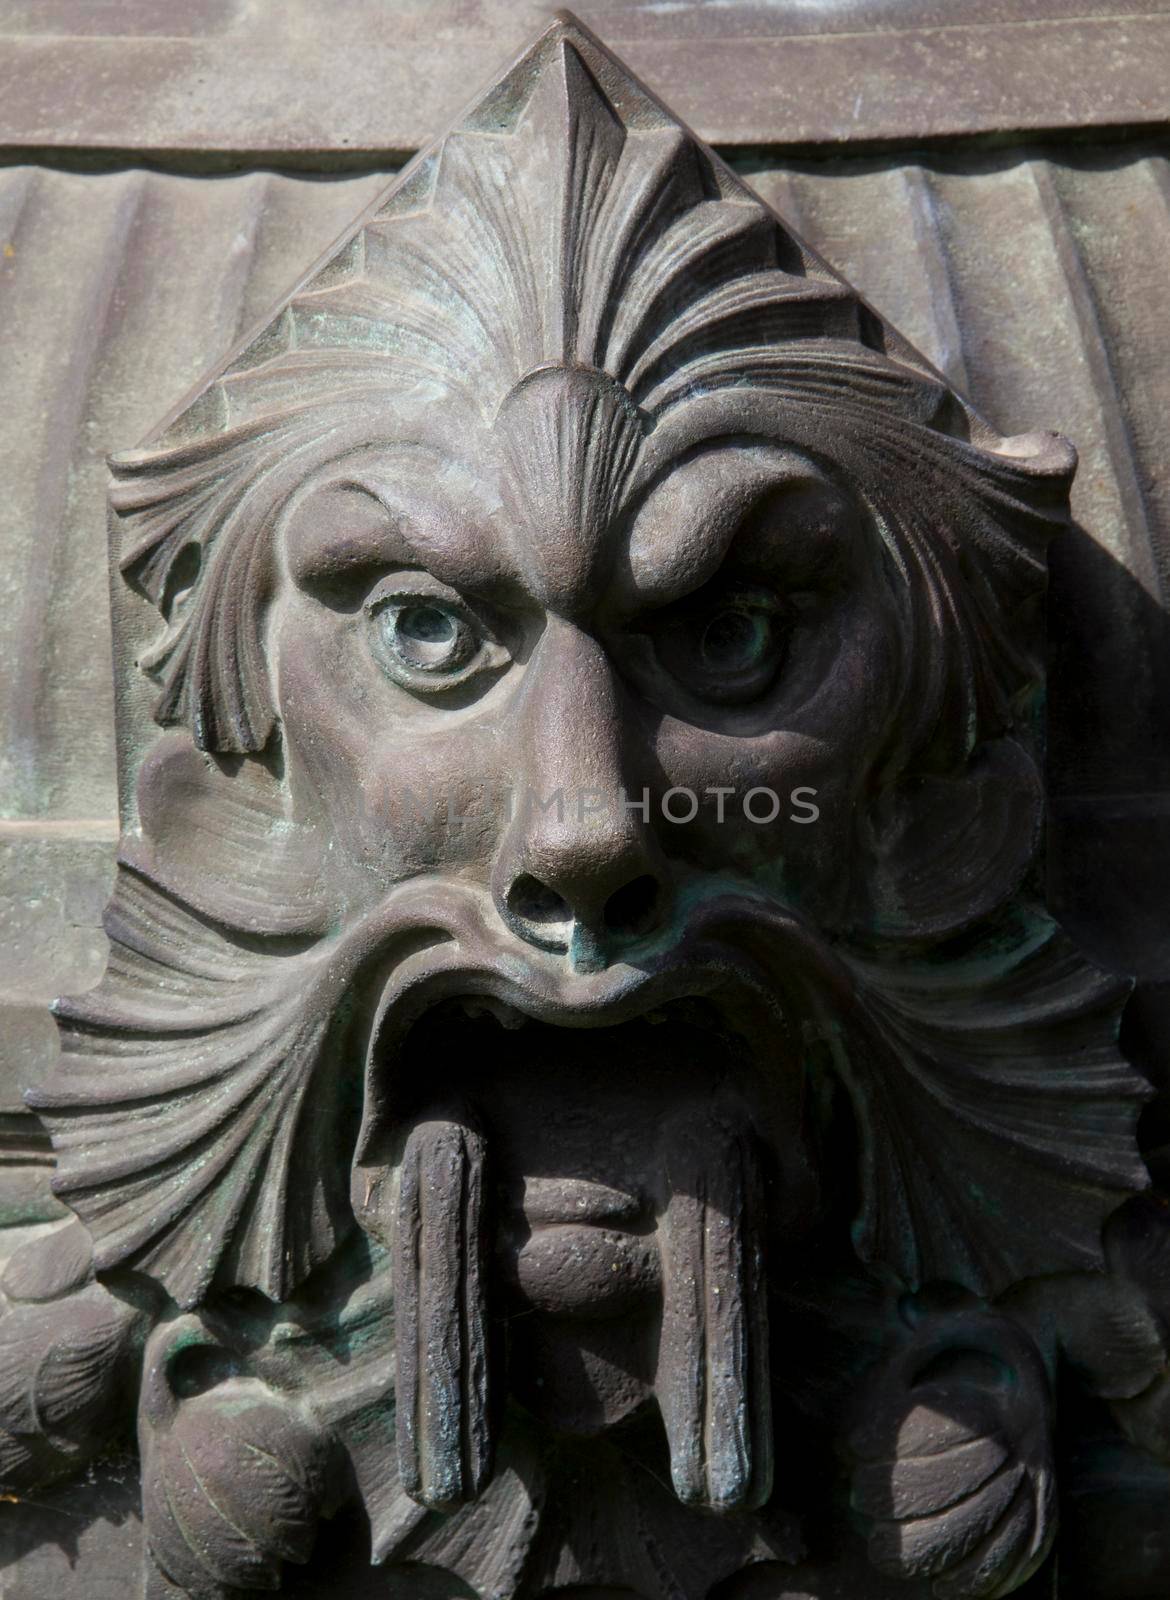 Demonic statue face made of metal on a street lamp by gallofoto